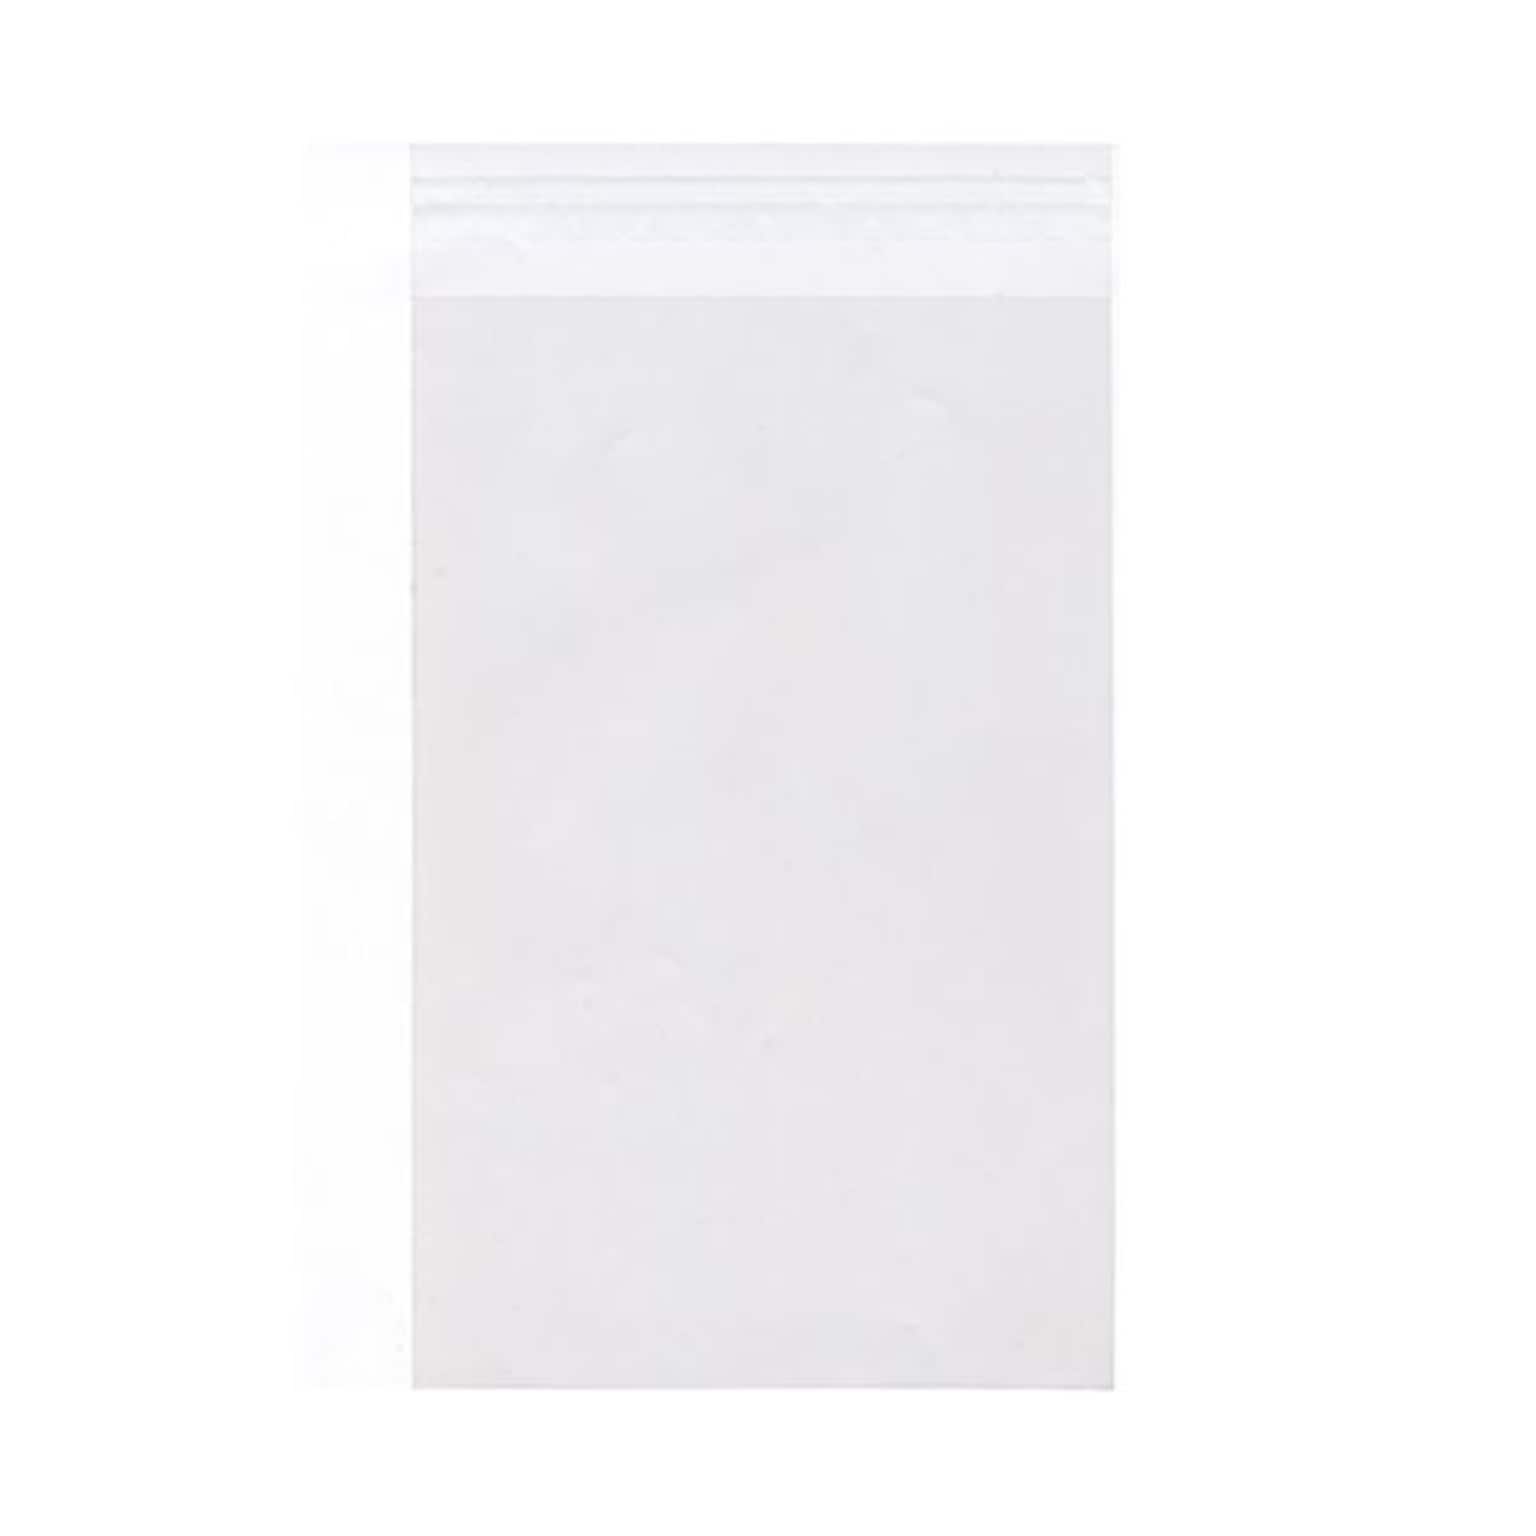 JAM Paper Cello Sleeves with Peel & Seal Closure, 8.9375 x 11.25, Clear, 1000/Carton (PAPERSIZECELLOB)